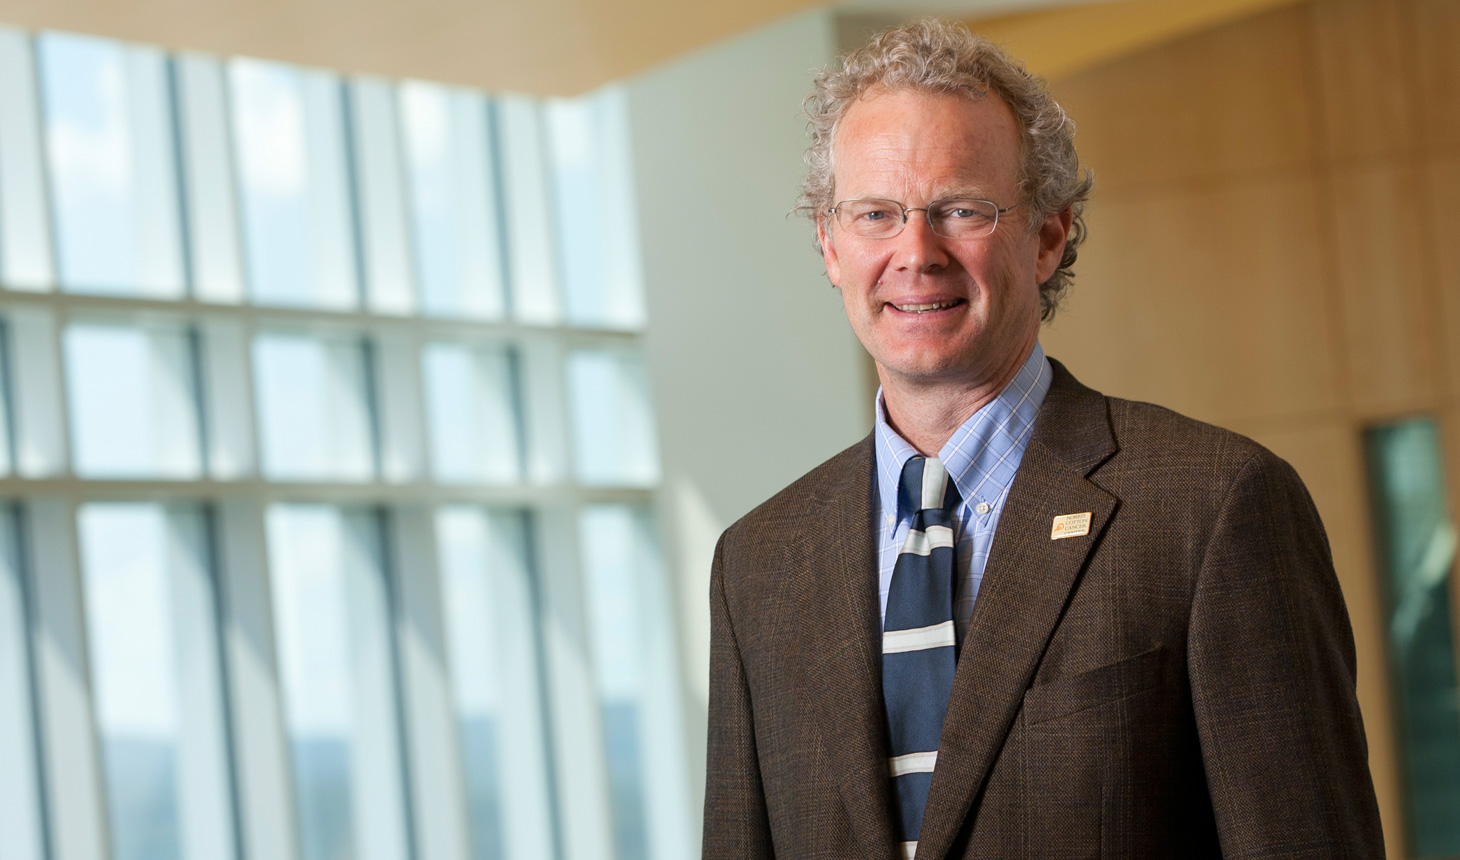 James Sargent, MD has been named the Scott M. and Lisa G. Stuart Professor in Pediatric Oncology.